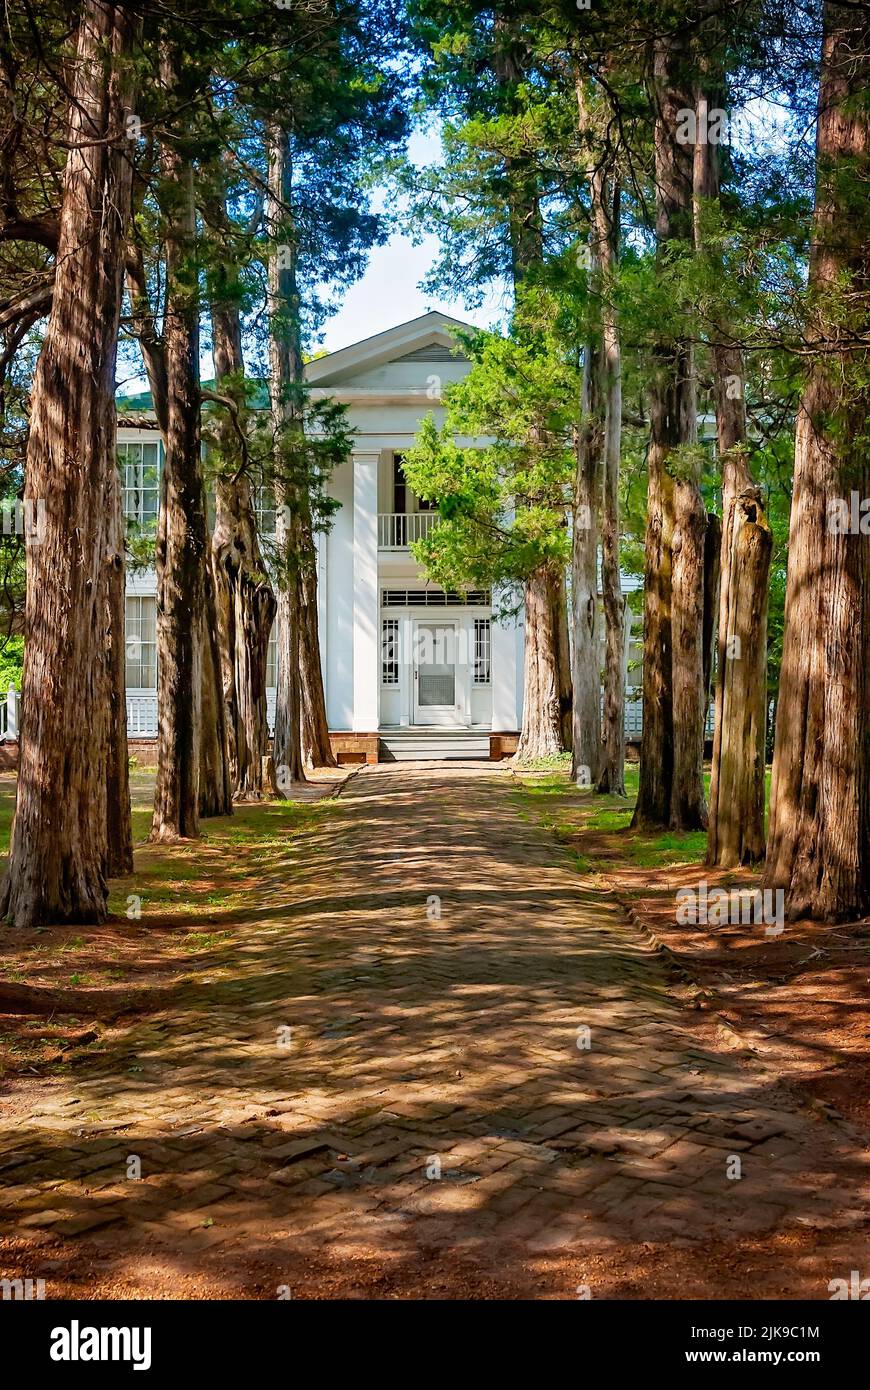 Rowan Oak, William Faulkner’s home, is pictured, Aug. 6, 2011, in Oxford, Mississippi. The primitive Greek Revival Home was built in the 1840s. Stock Photo